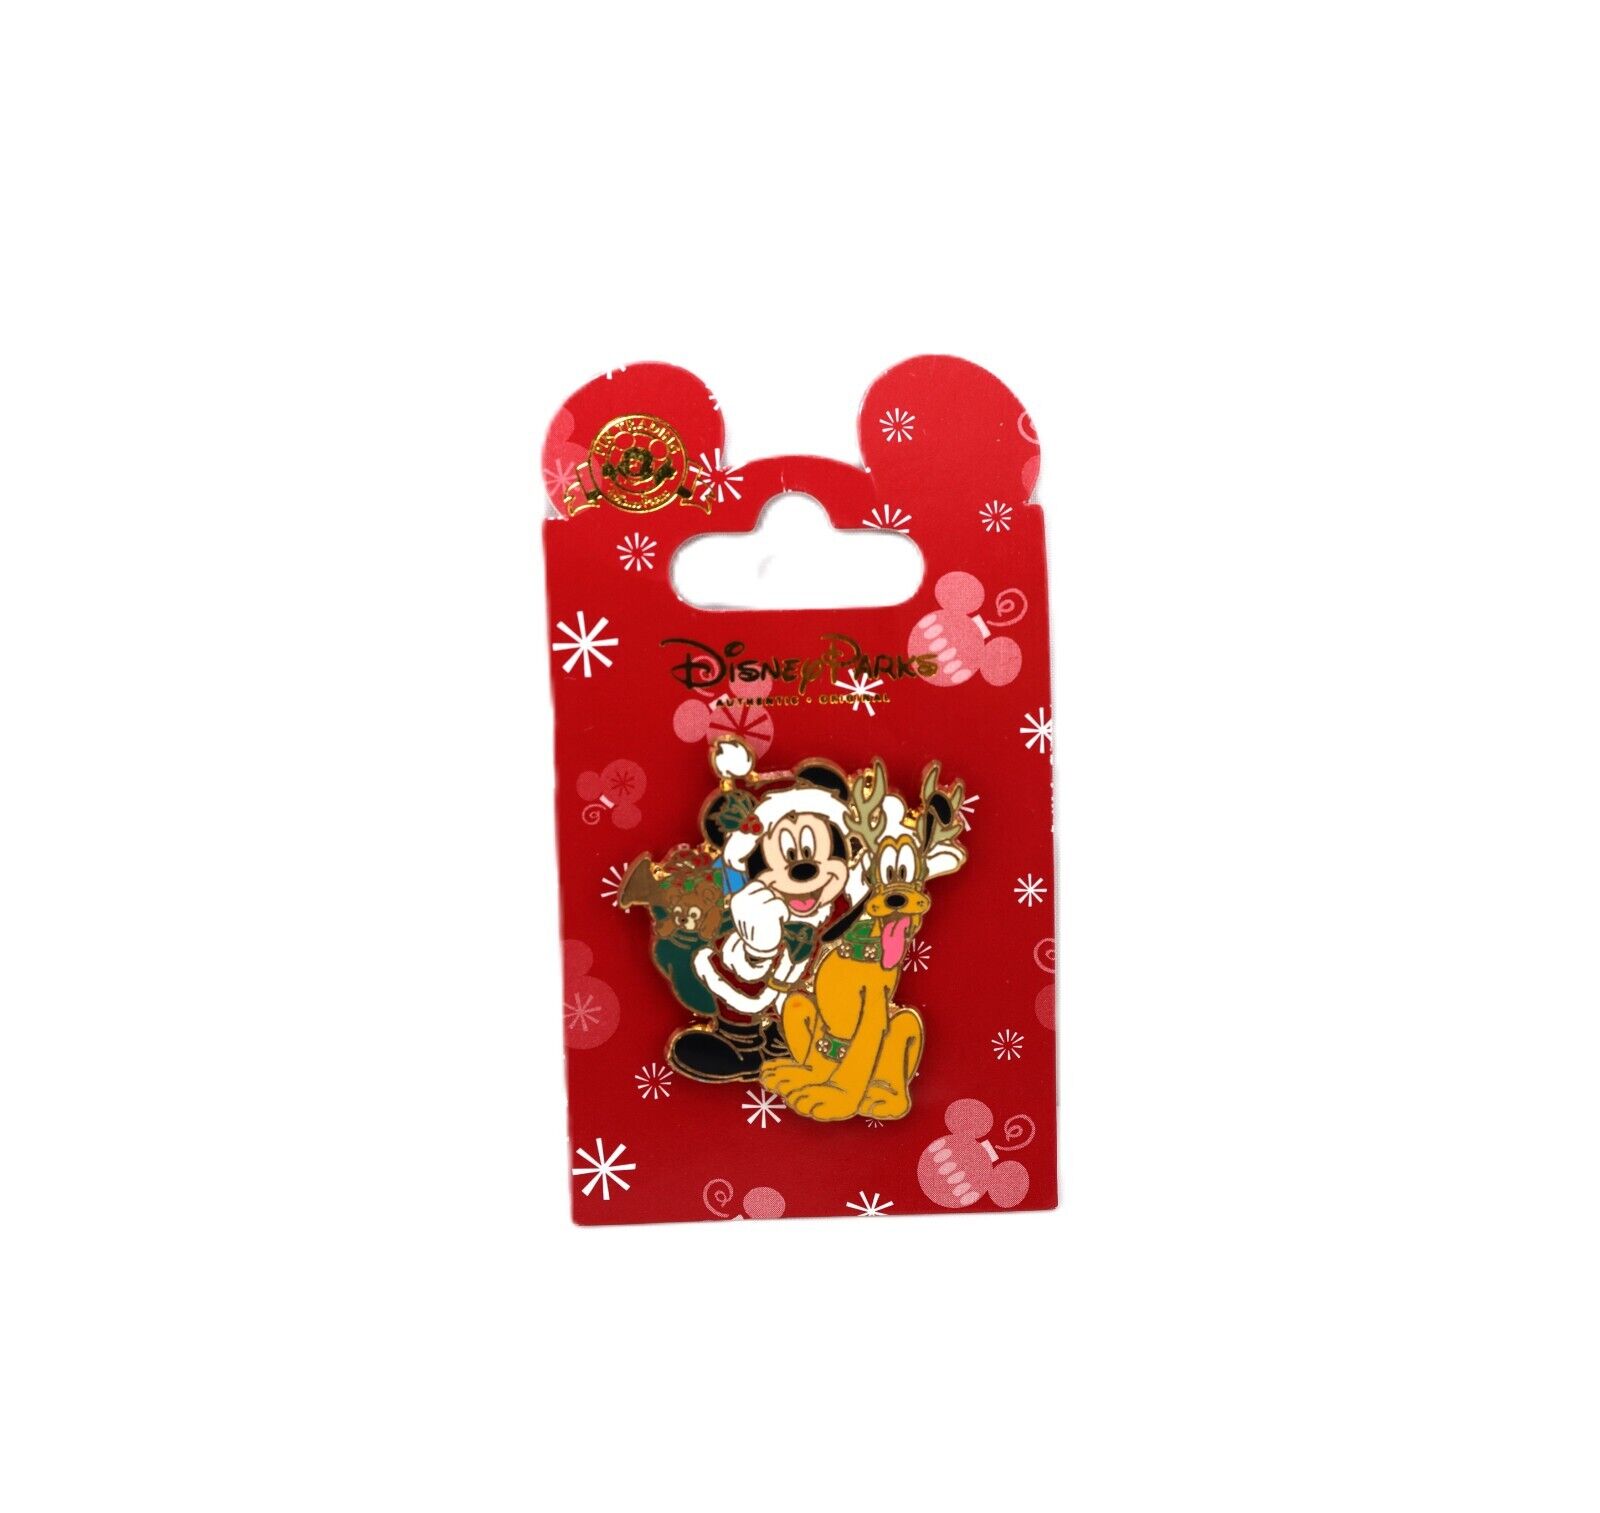 Disney Pin - Mickey and Pluto in Santa and Reindeer Outfits